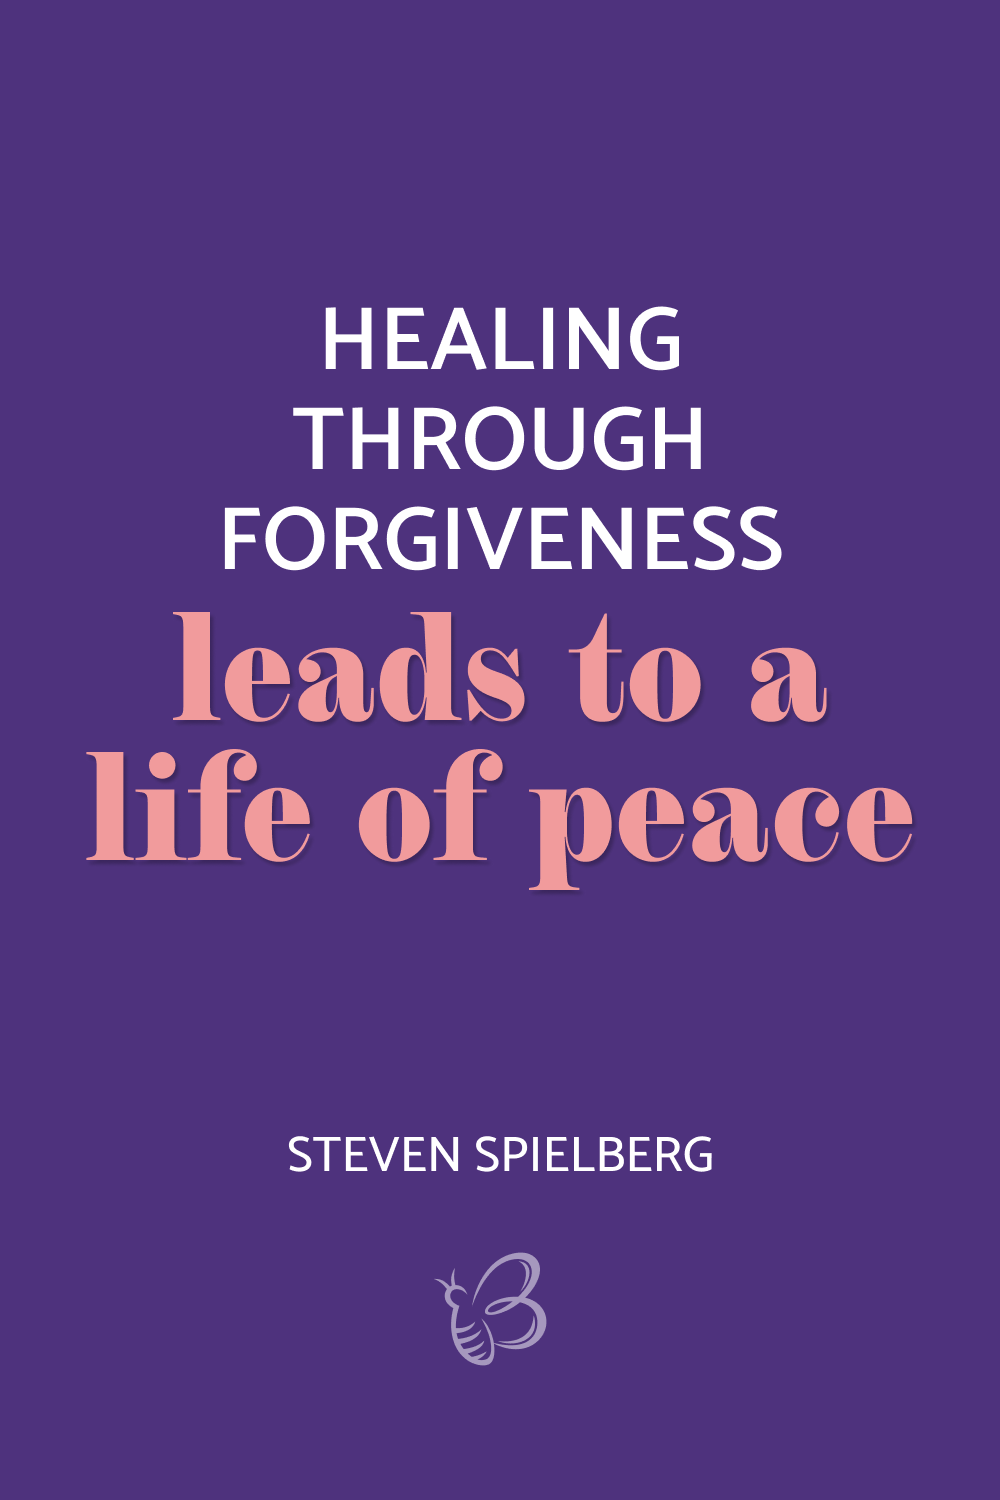 Healing through forgiveness leads to a life of peace. – Steven Spielberg